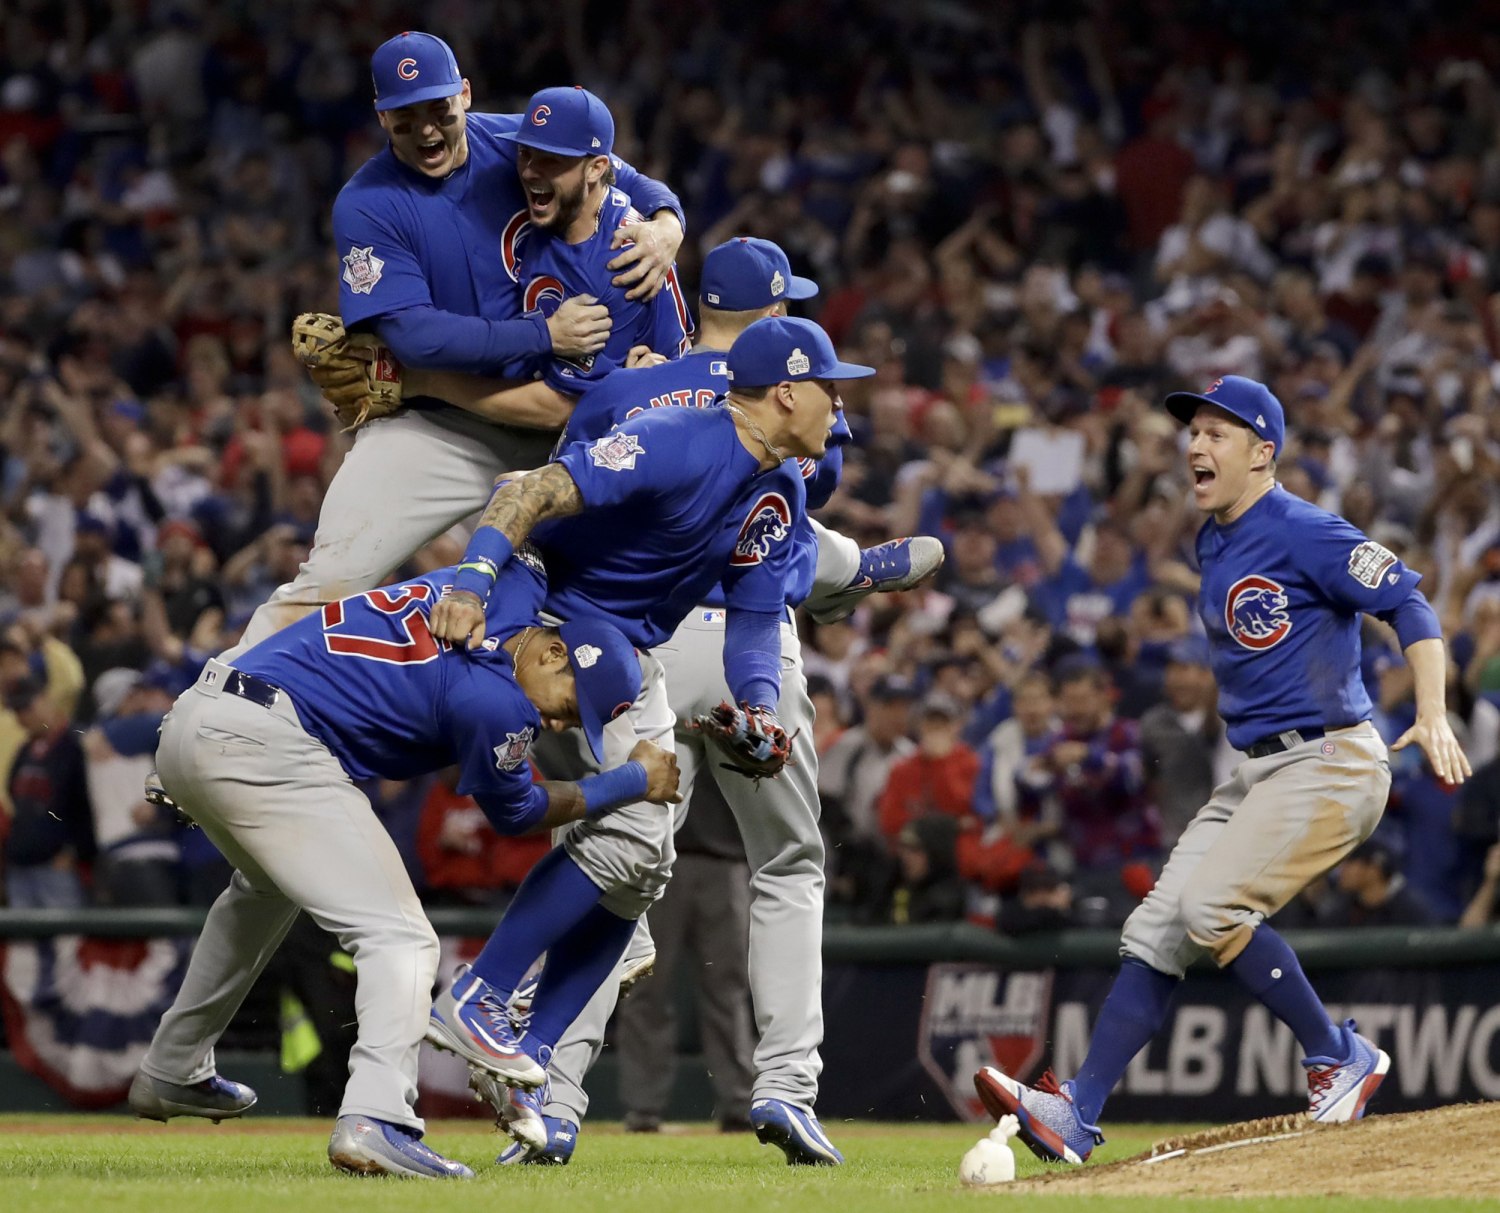 Chicago Cubs Bury Curse With First World Series Title in 108 Years